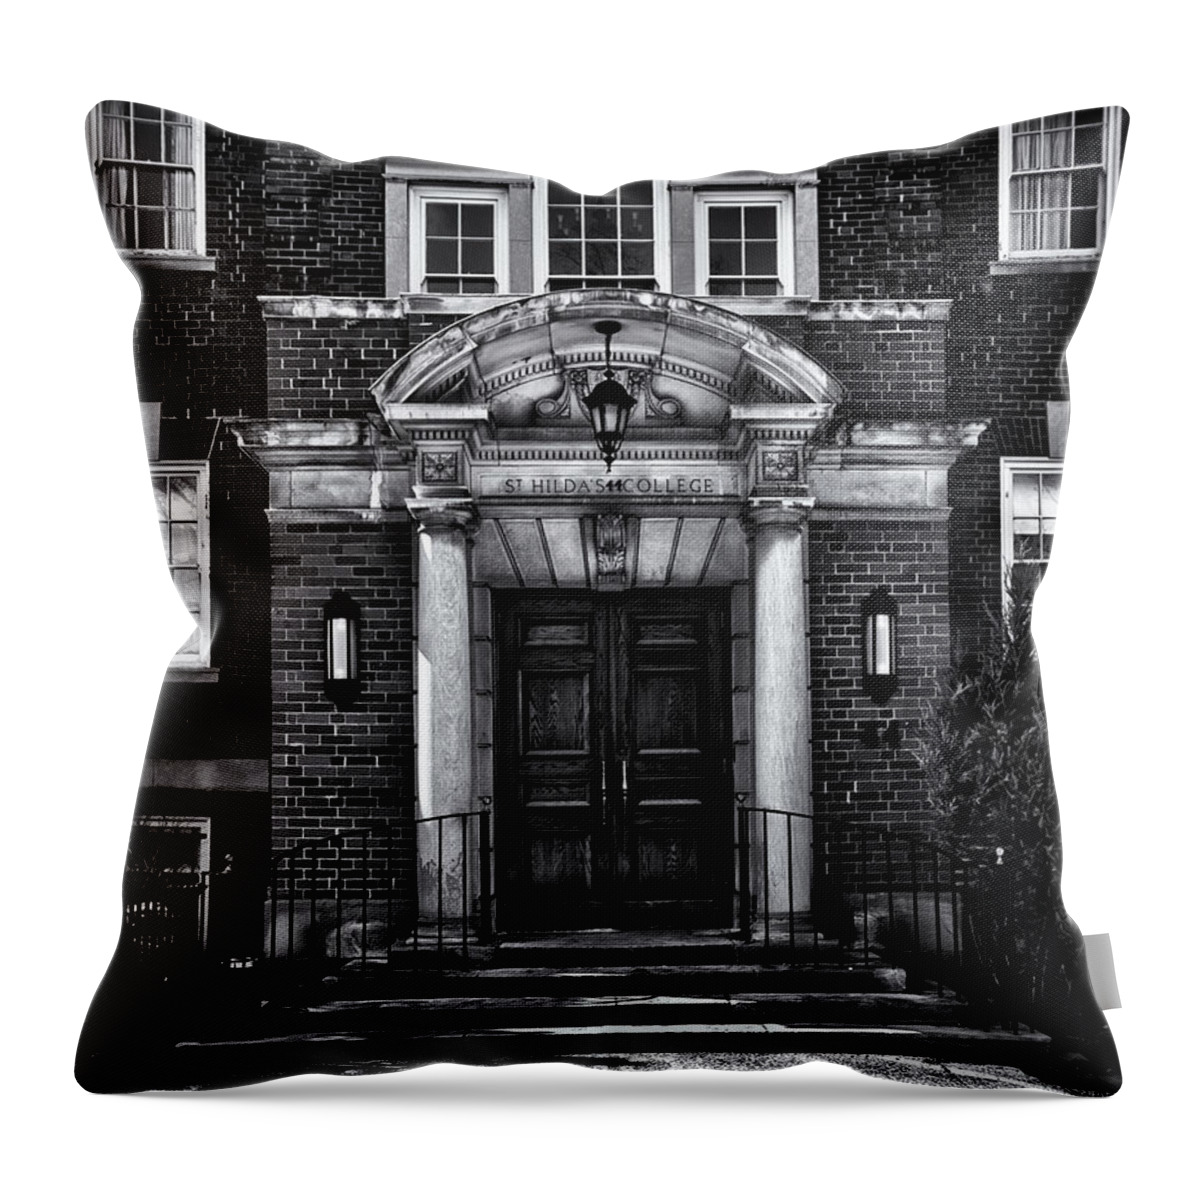 Toronto Throw Pillow featuring the photograph St Hilda's College University of Toronto Campus by Brian Carson